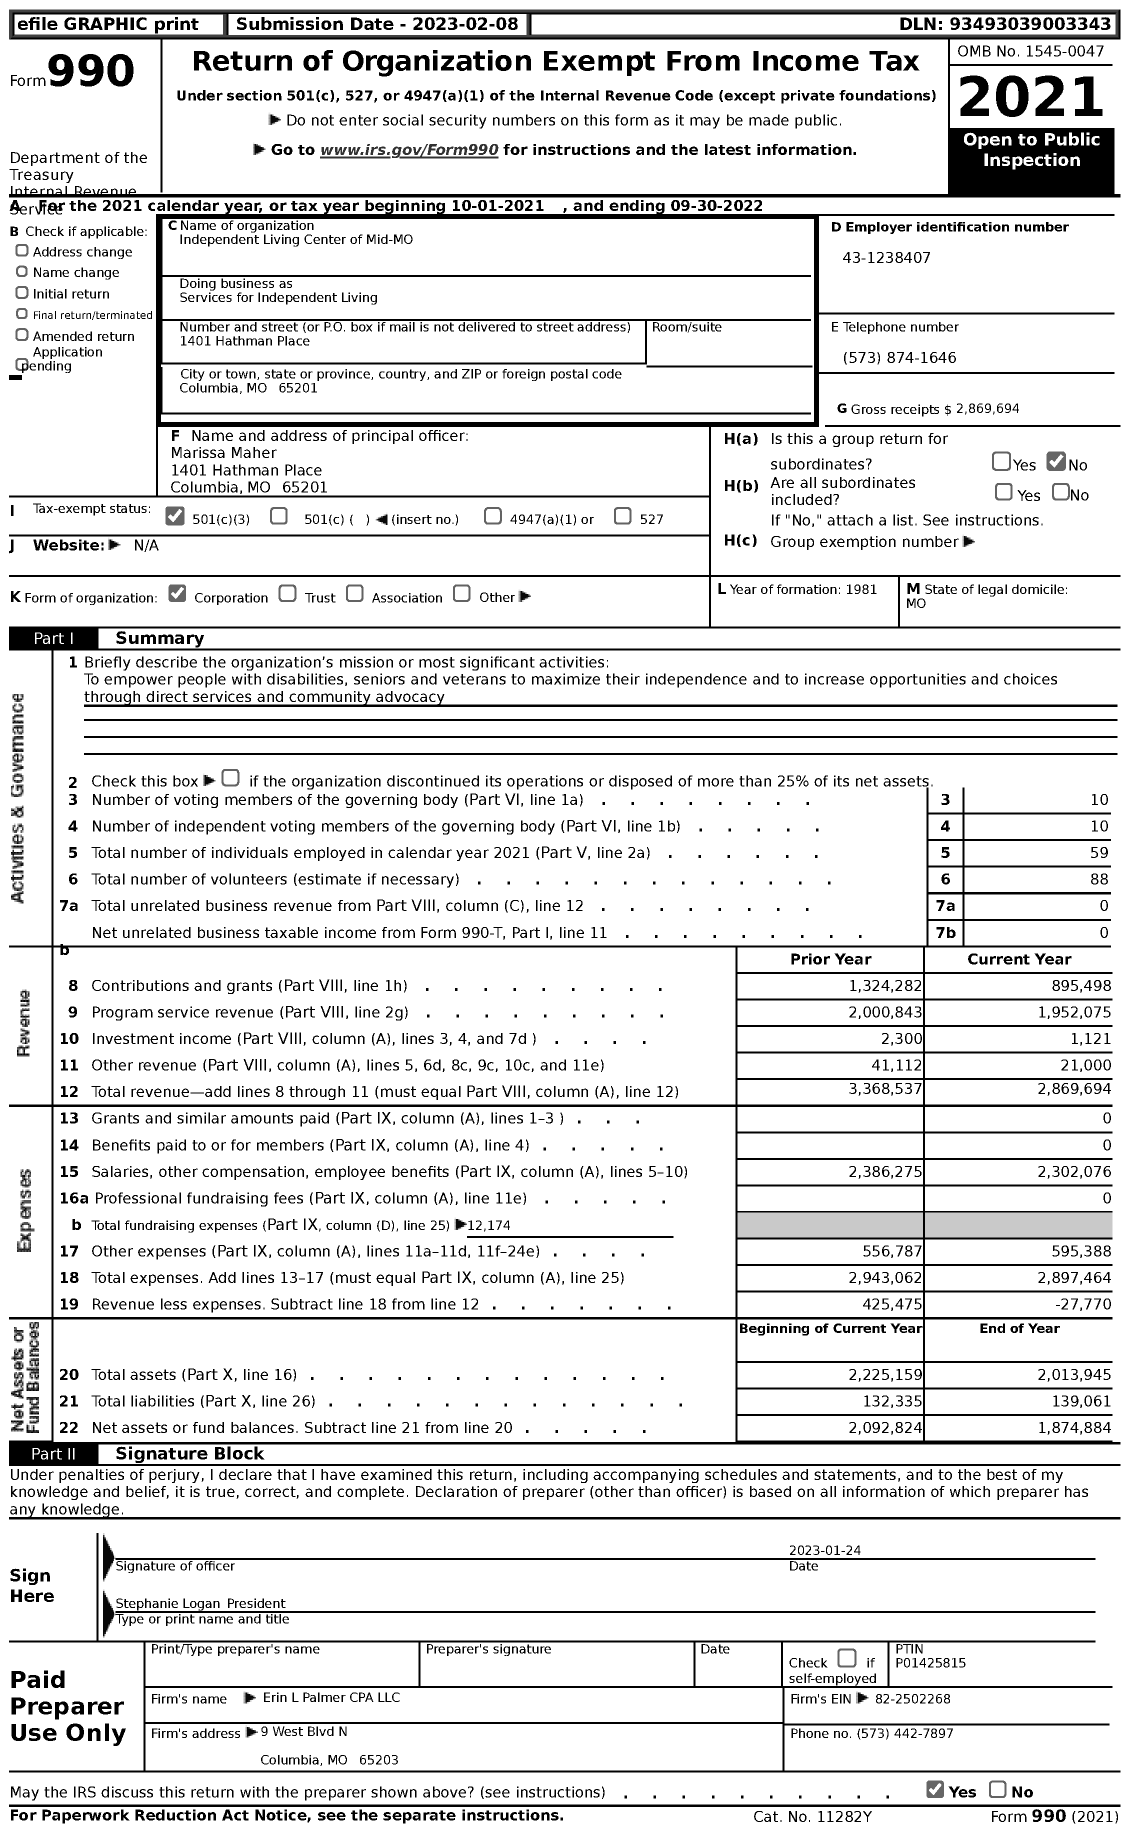 Image of first page of 2021 Form 990 for Services for Independent Living / Independent Living Center of Mid-MO